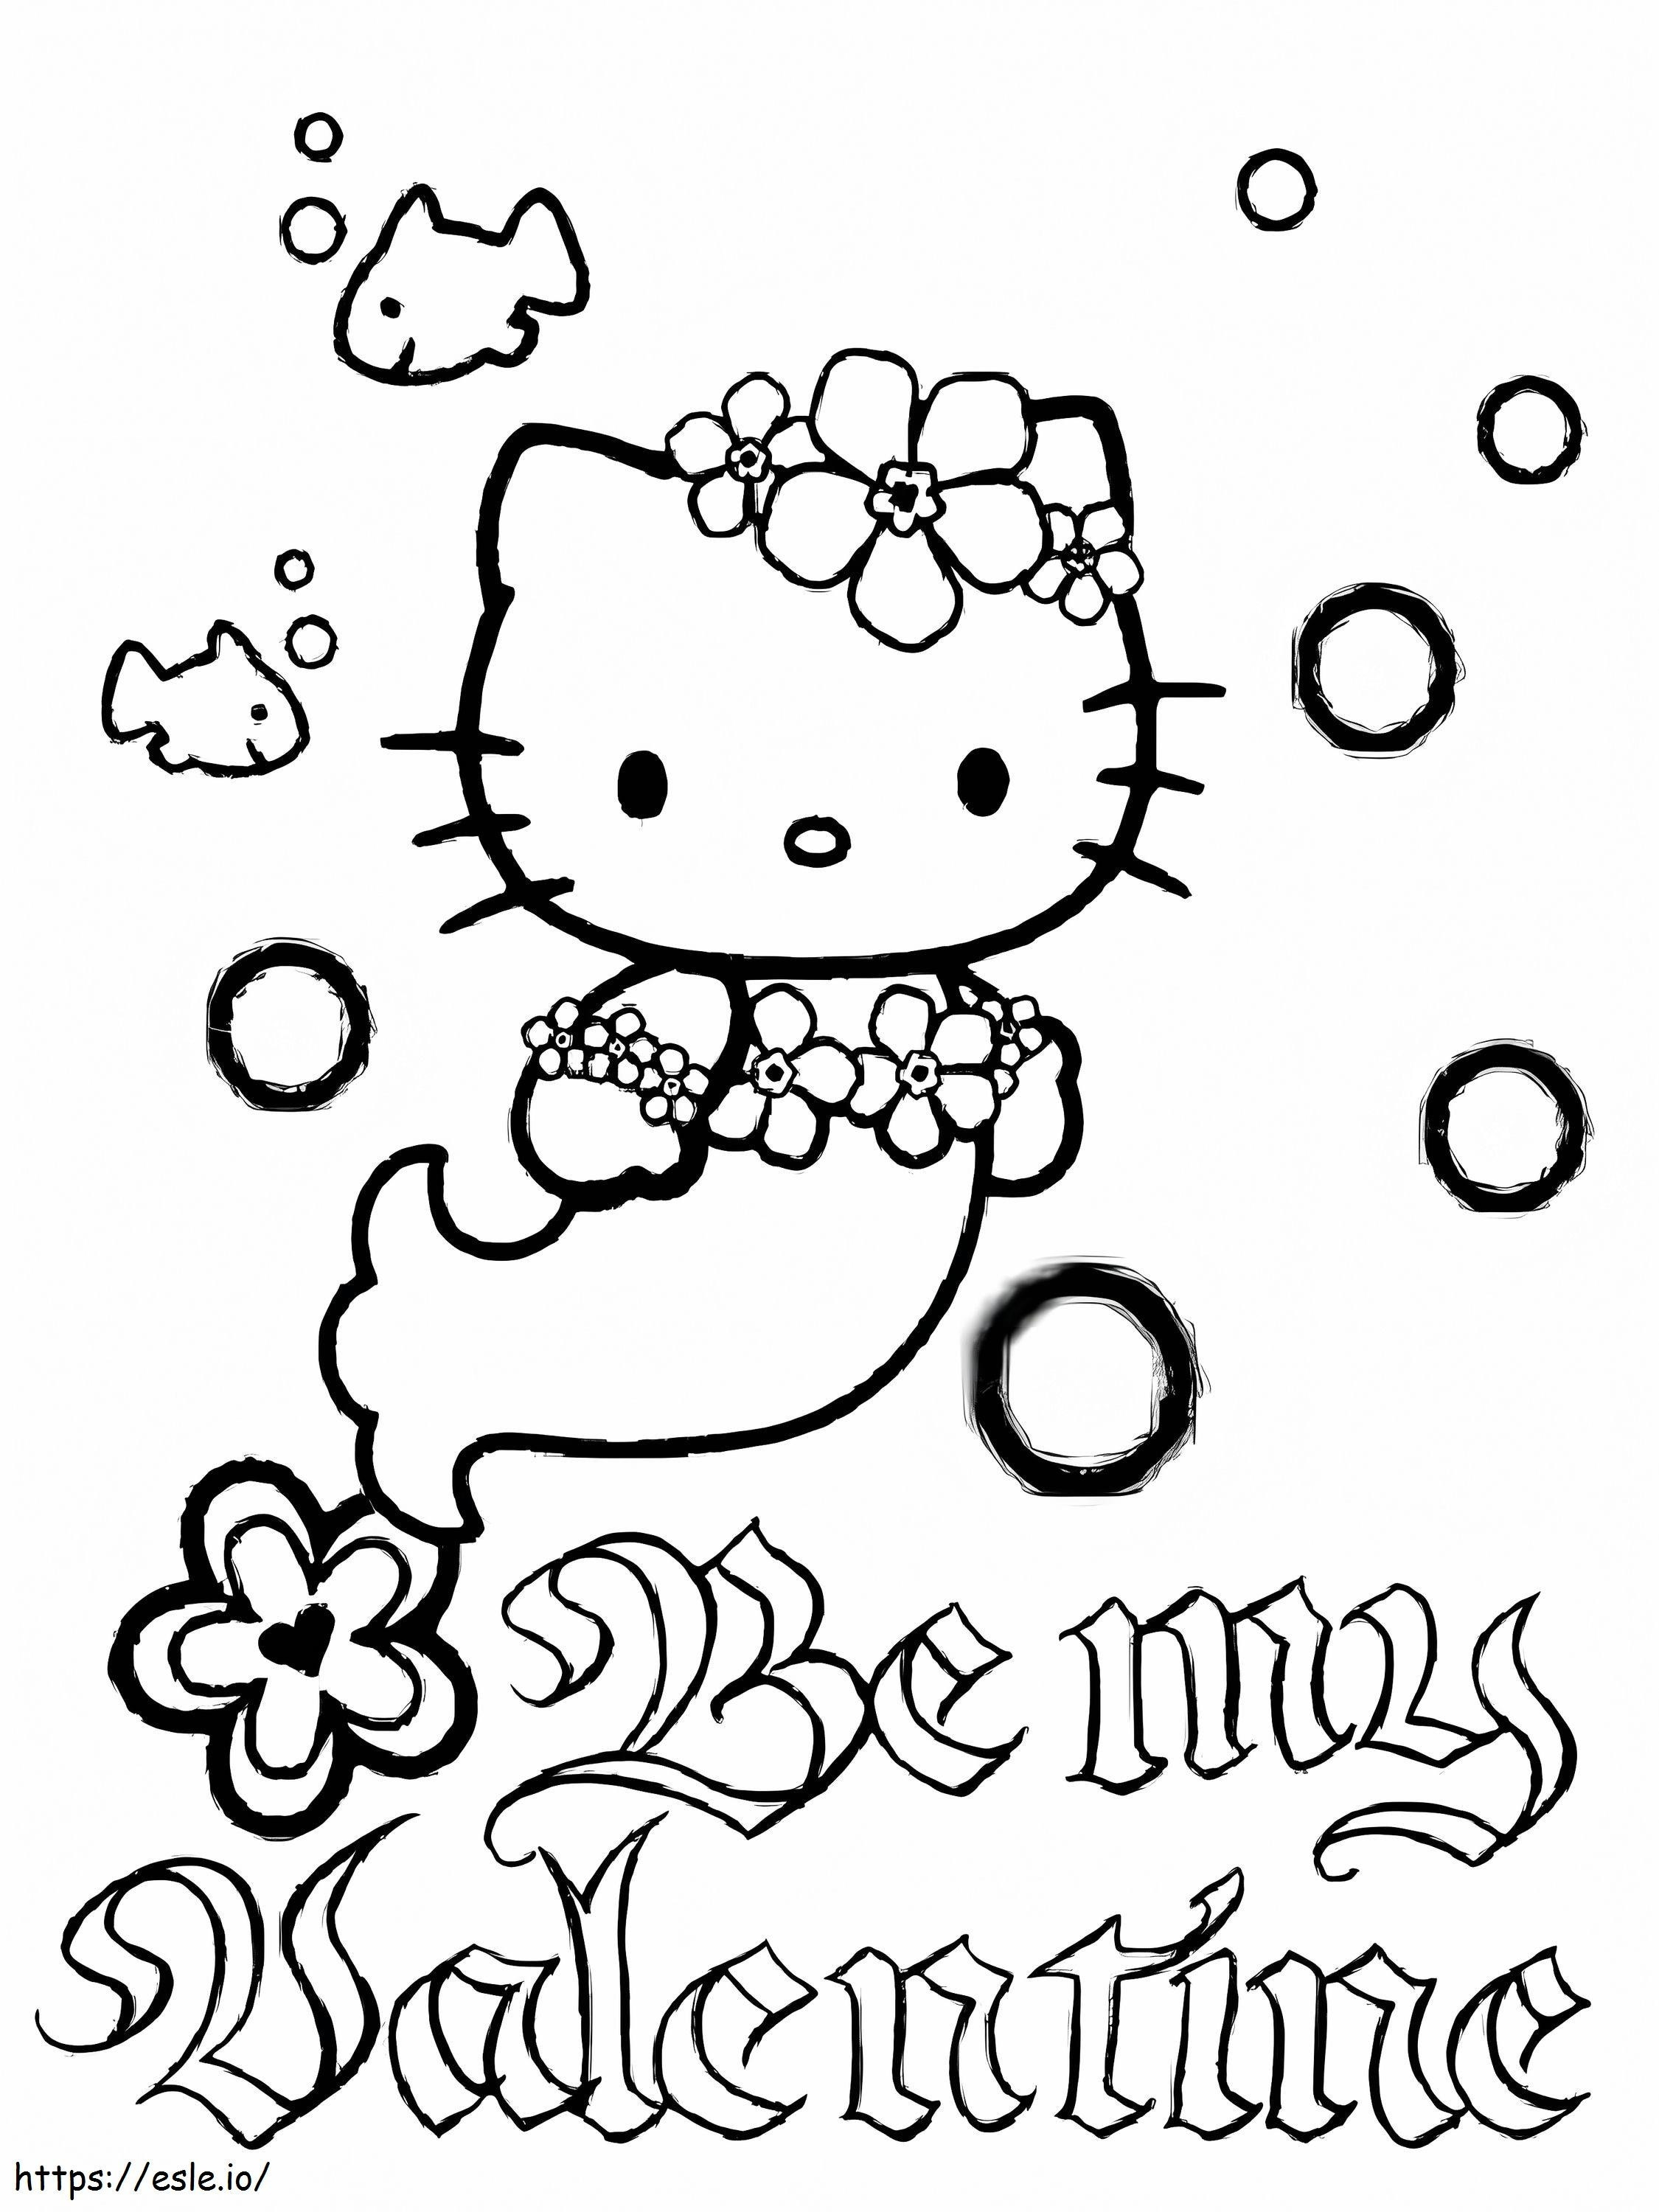 Cute Hello Kitty Mermaid coloring page